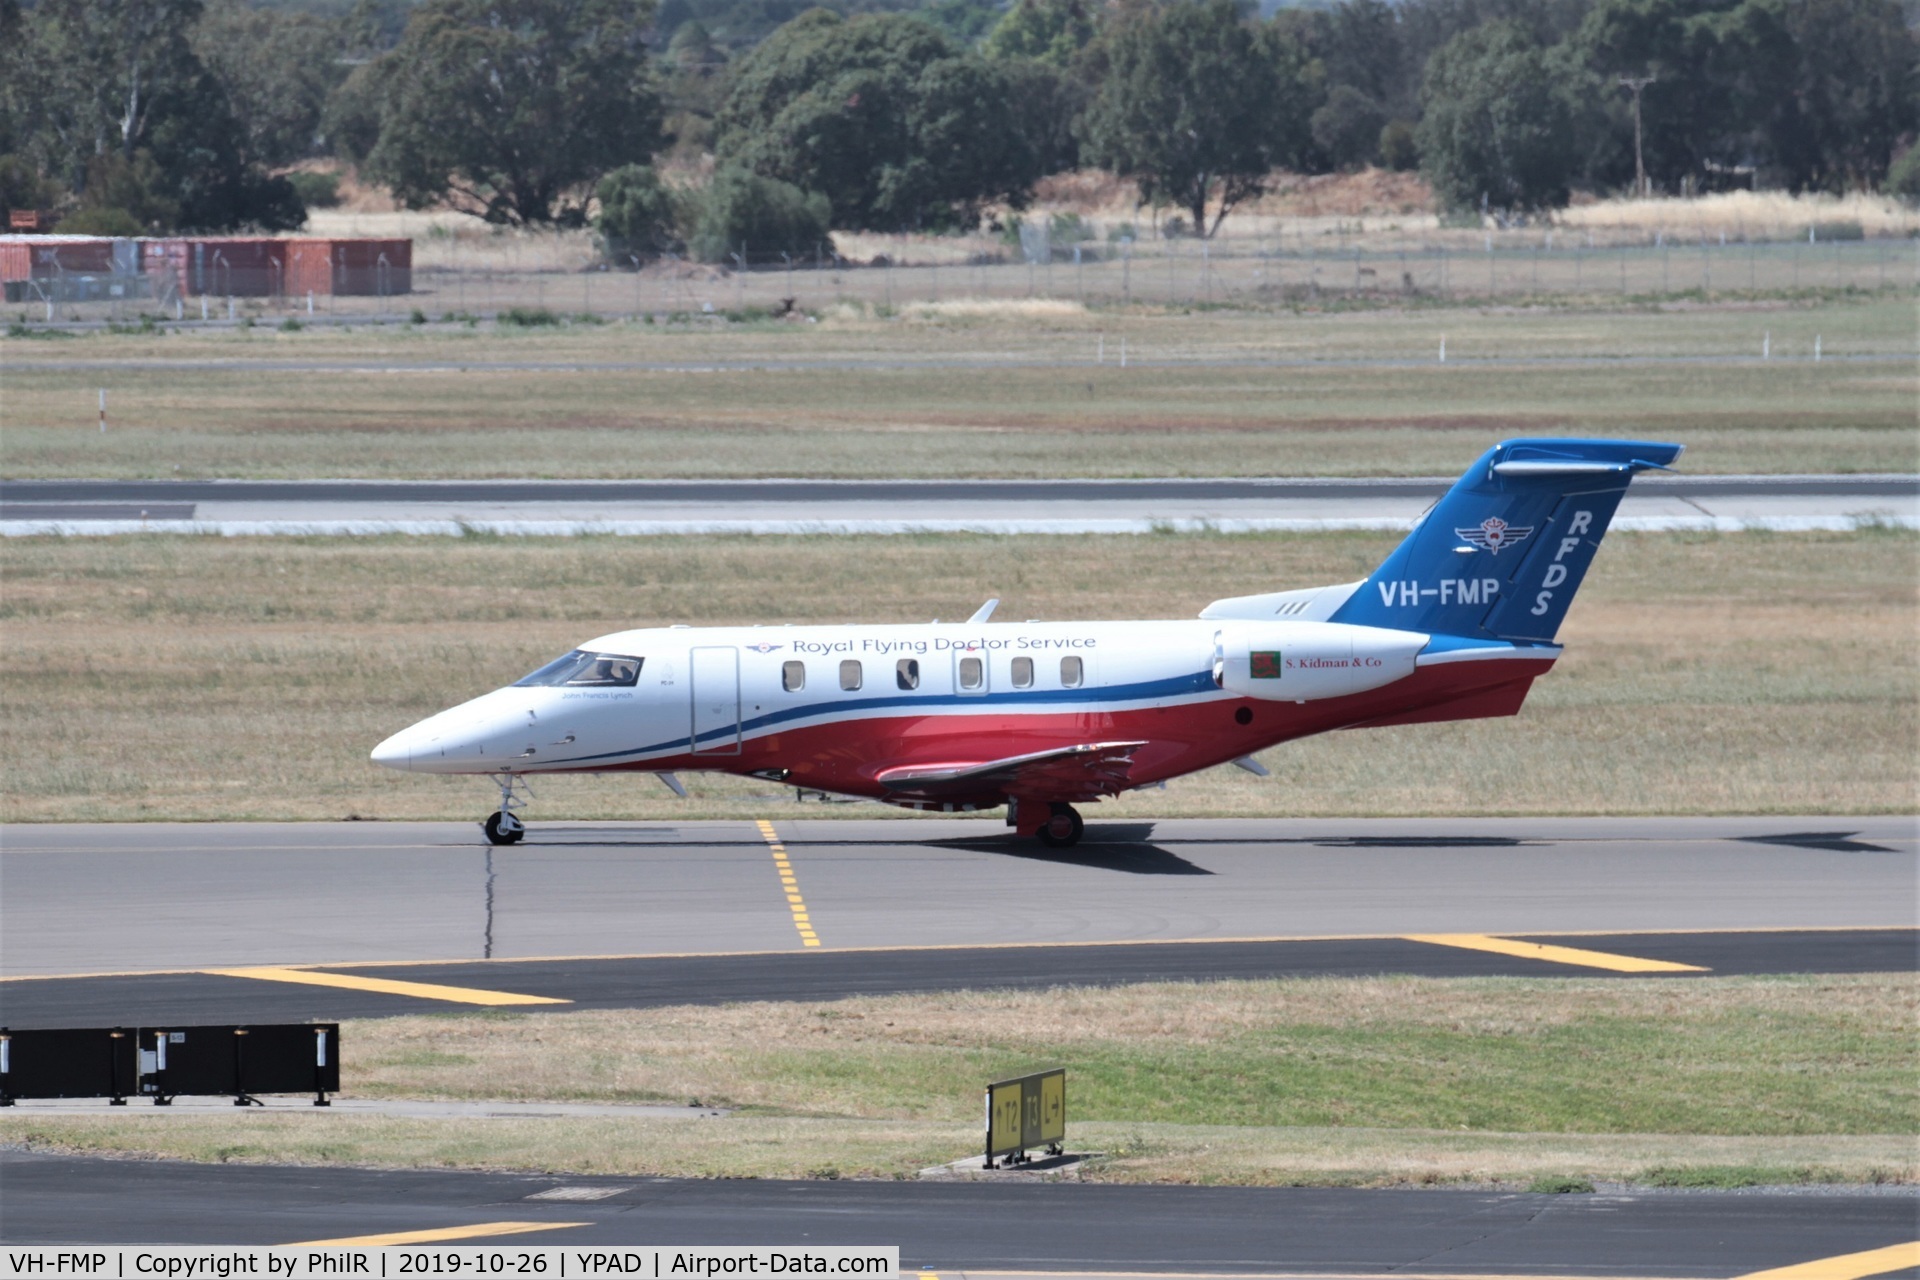 VH-FMP, 2018 Pilatus PC-24 C/N 118, On charter to the Royal Flying Doctor Service departing Adelaide